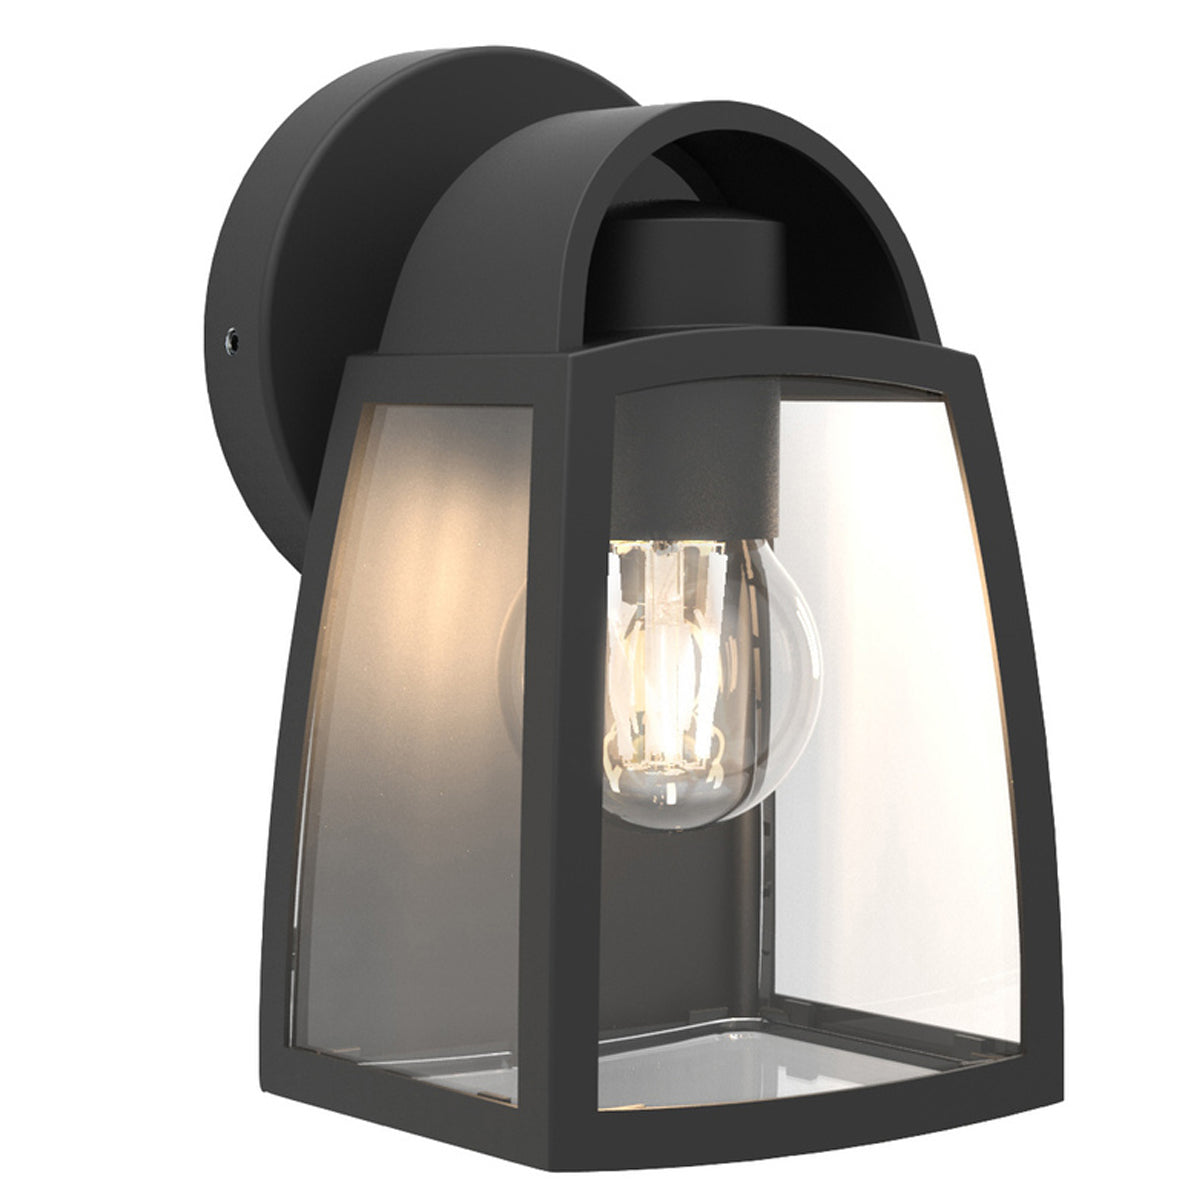 CGC KELSEY Black Wall Lantern With Clear Glass Diffuser